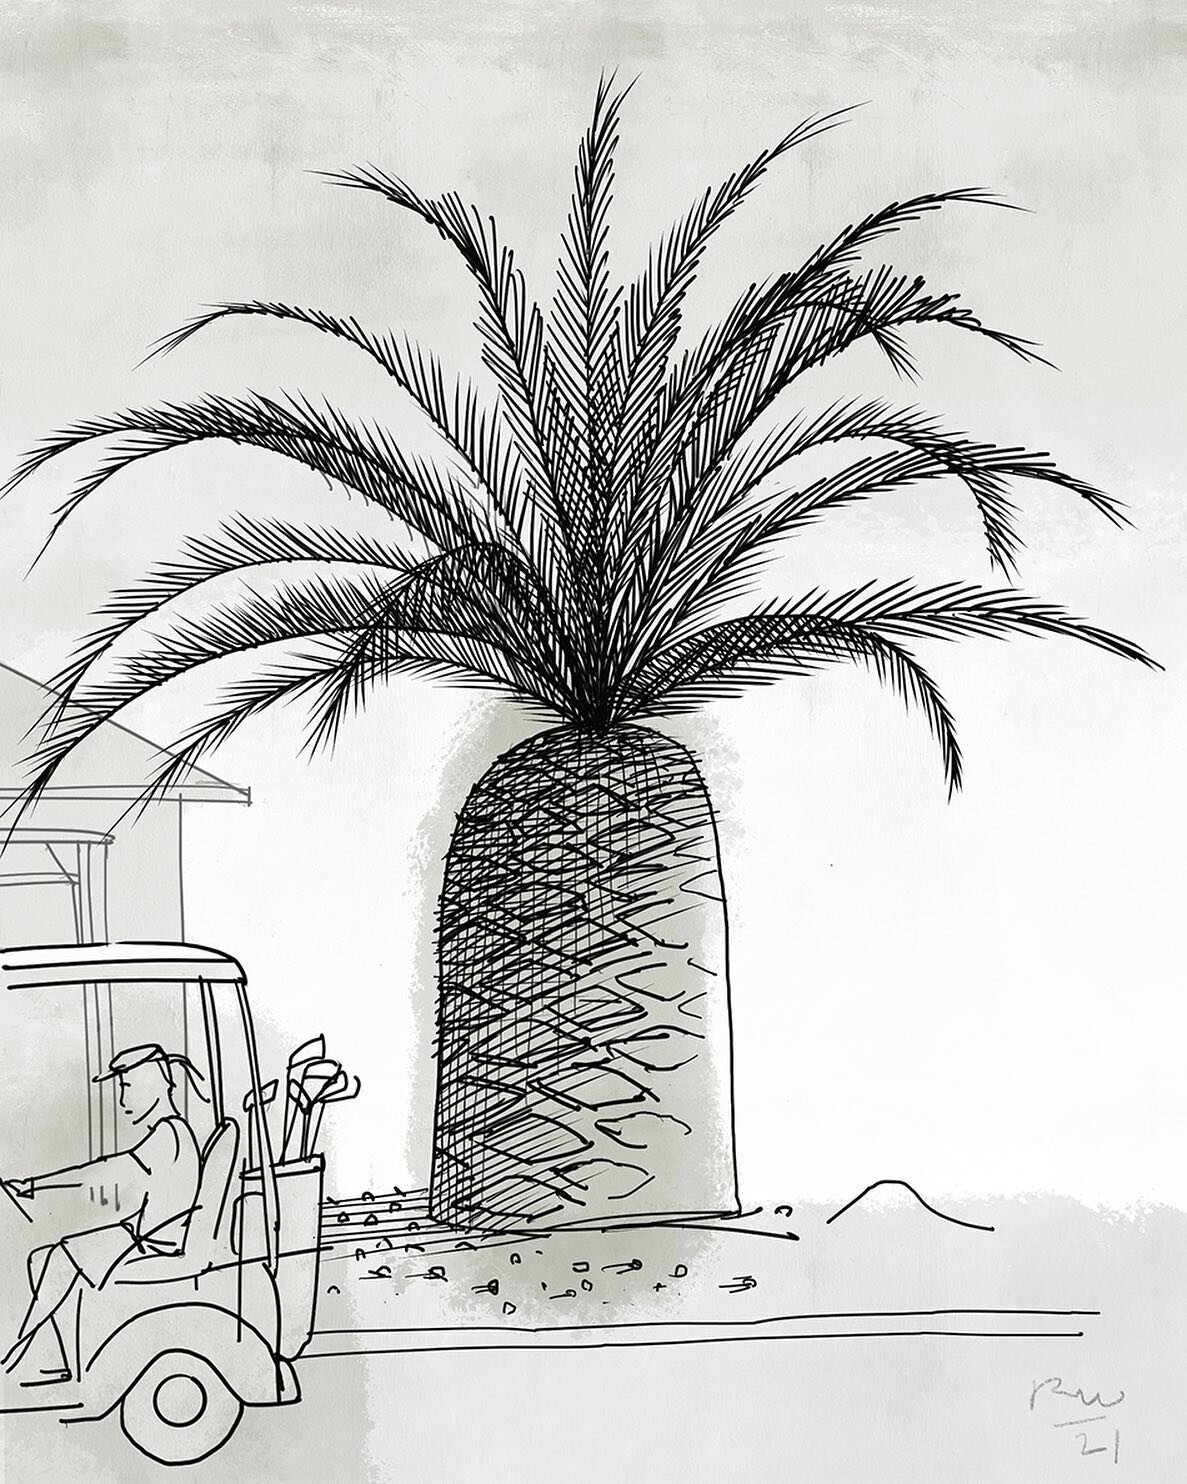 Sun Lakes Palm
.
www.williamsonstudioseattle.com/drop-cloth-blog/sun-lakes-palm
.
Golfers whiz by as a palm tree imitates a giant carrot emerging from a ground of crunchy brown kibbles. As seen in Arizona &hellip;
.
#williamsonstudioseattle 
#drawing